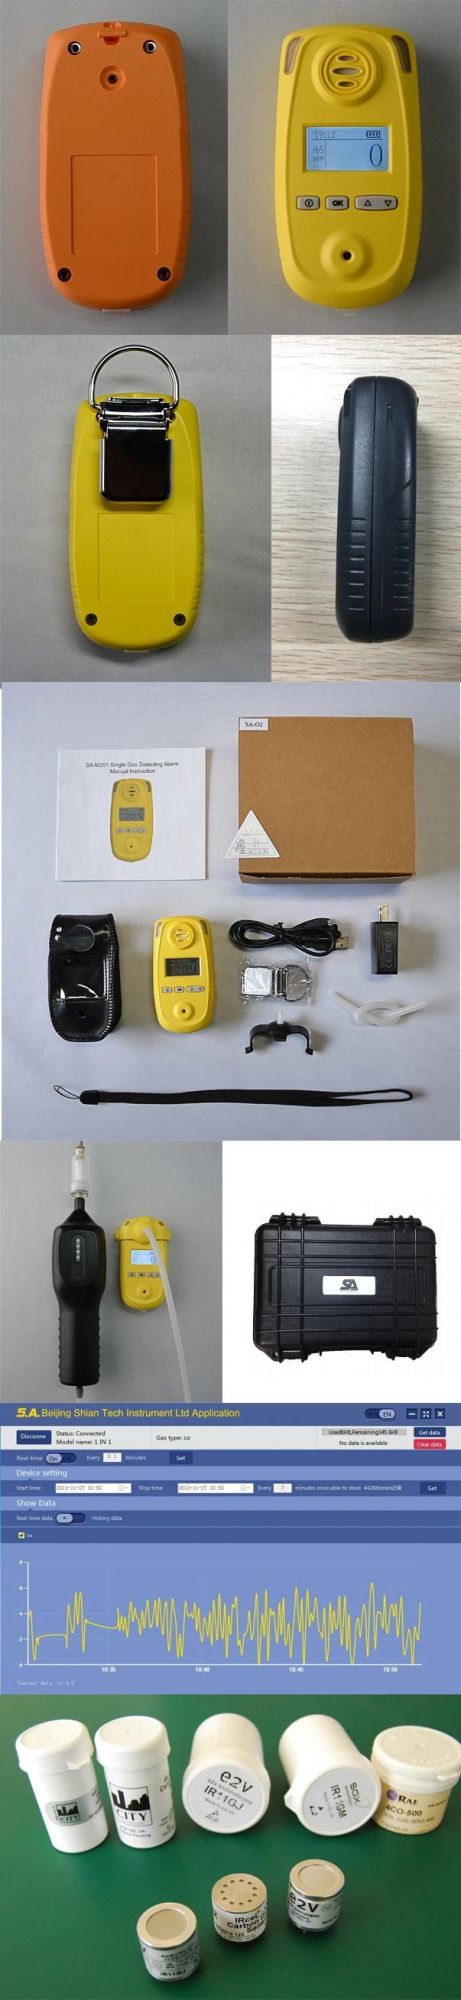 Portable No2 Gas Detector 20ppm No2 Gas Monitor From Manufacturer